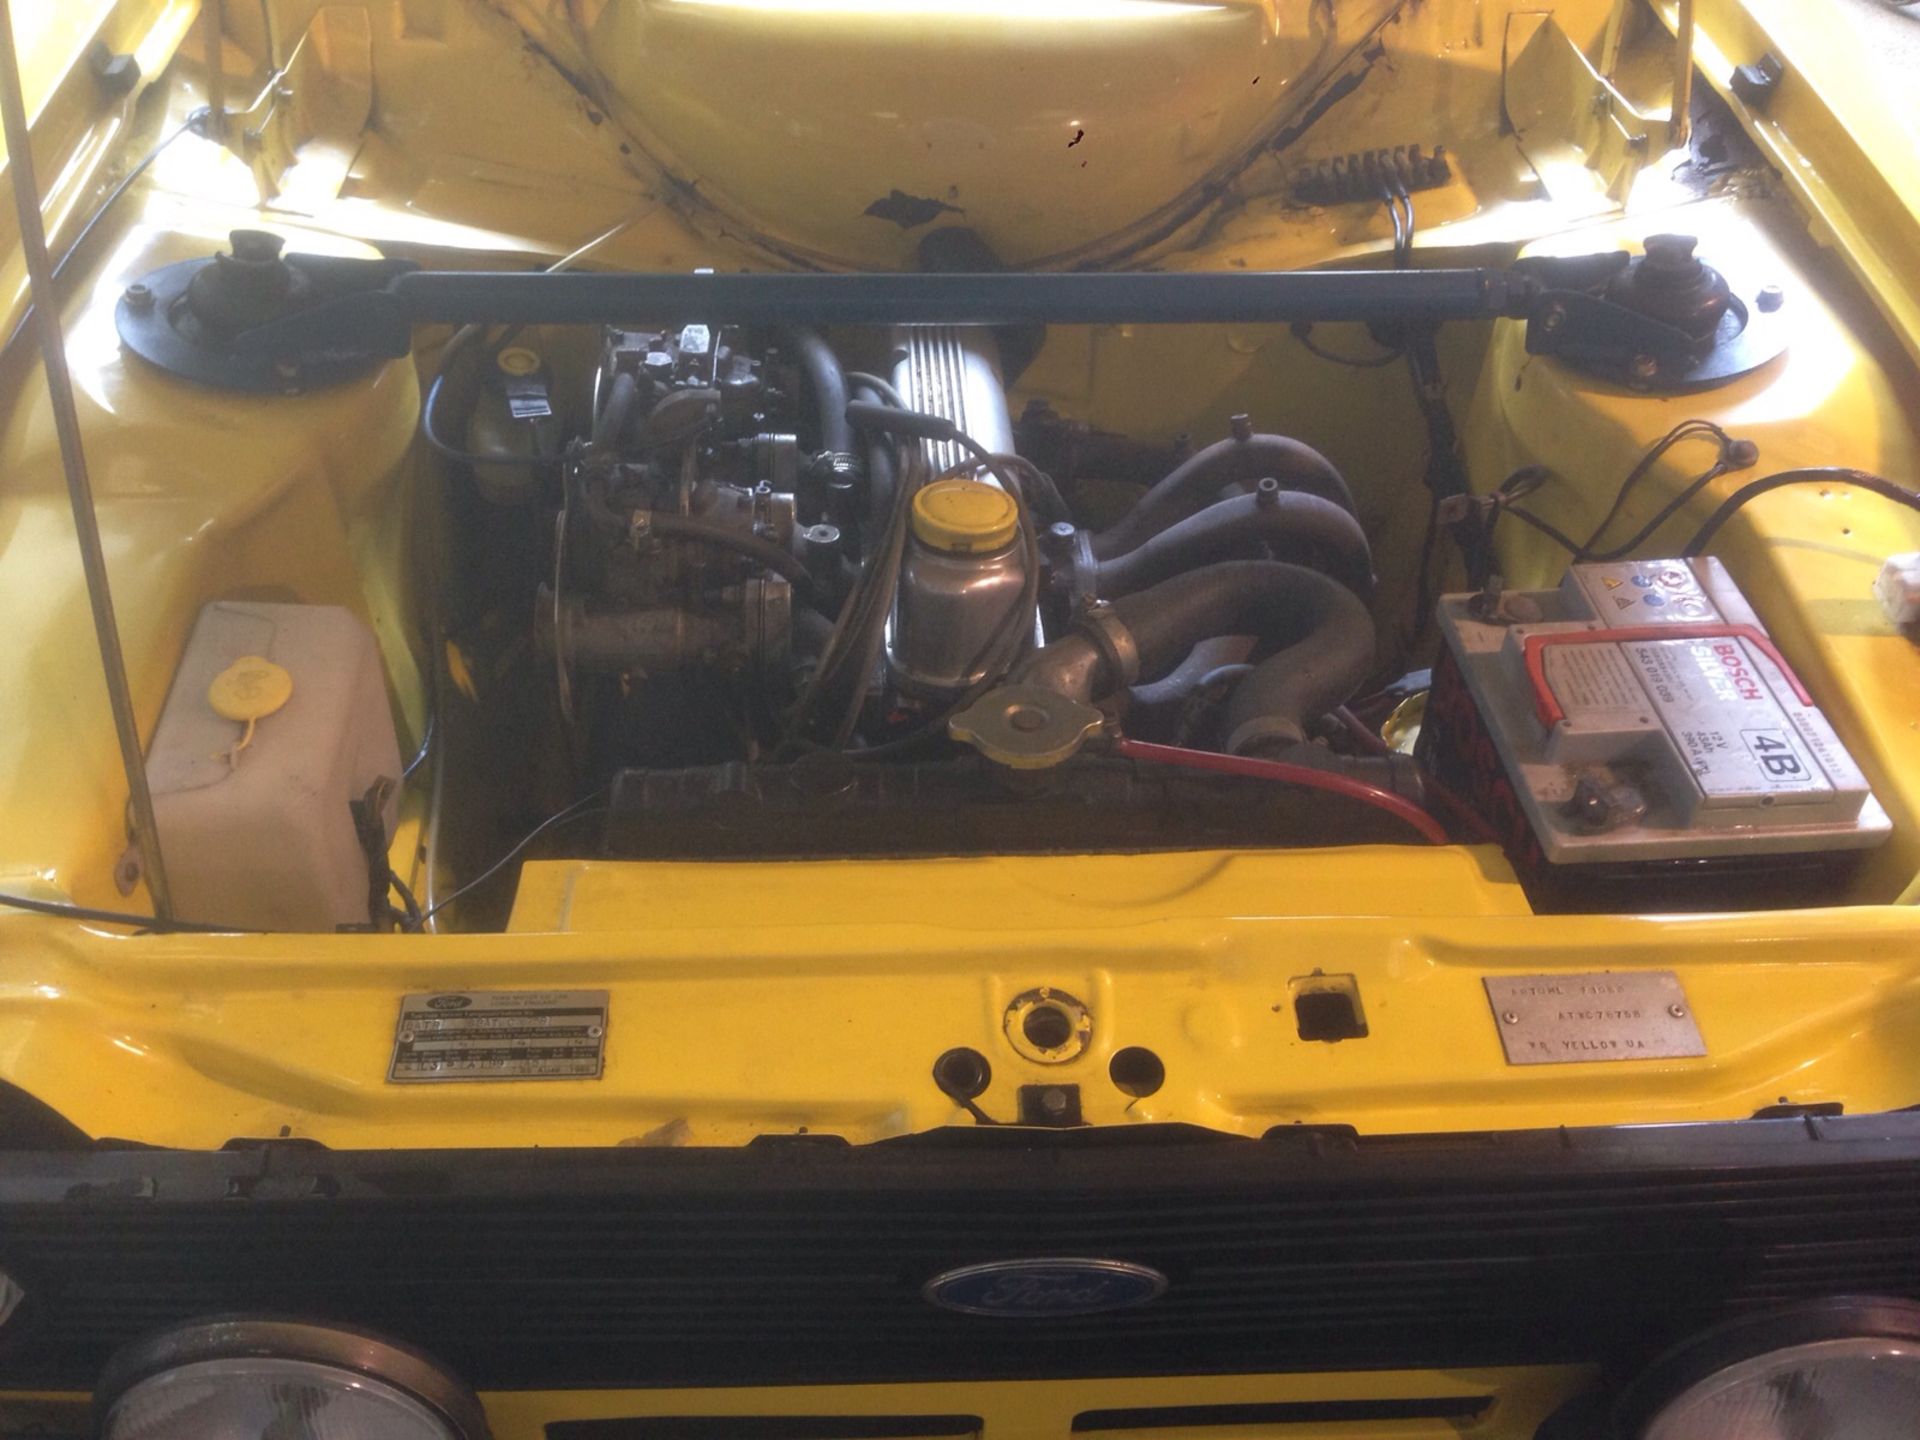 1979/T Ford Escort mk2 1600 Sport - in Signal yellow -  UK car  (545 miles) since rebuild - Image 27 of 54